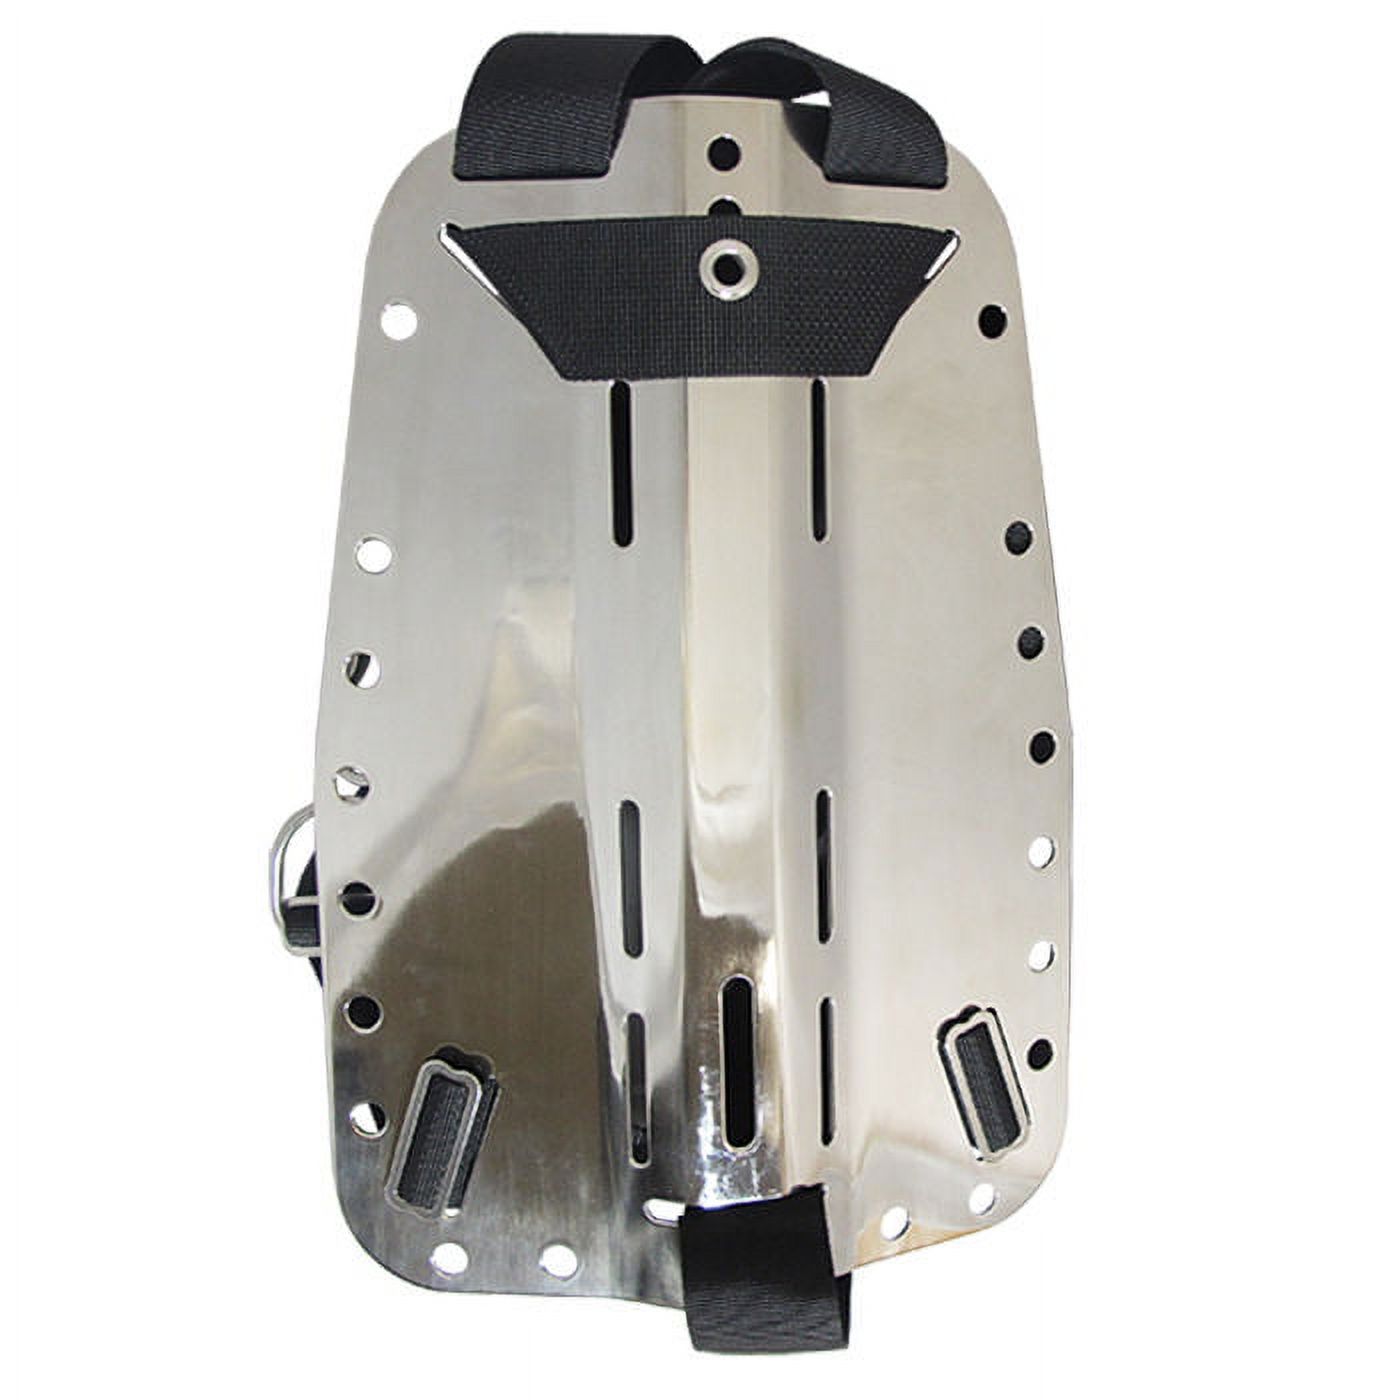 Tech Diving Stainless Steel Backplate w/ Harness System + Backpad + Tank Belt - image 2 of 3